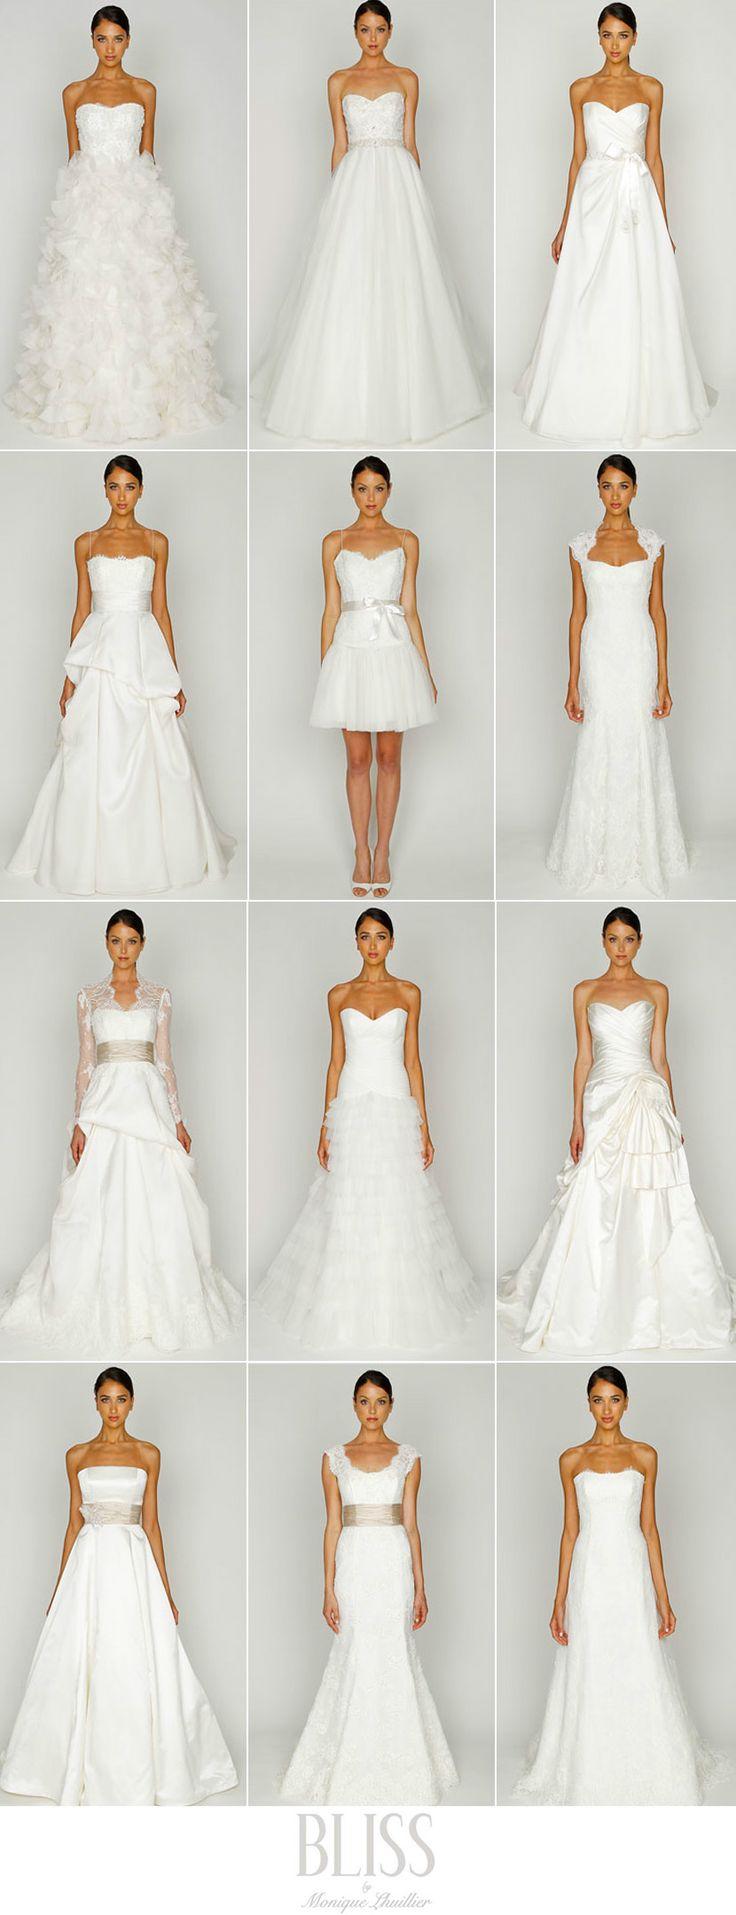 Свадьба - Wedding Dress Shapes - Good Guide To Look At Before You Go Hunting For Your Wedding Dress